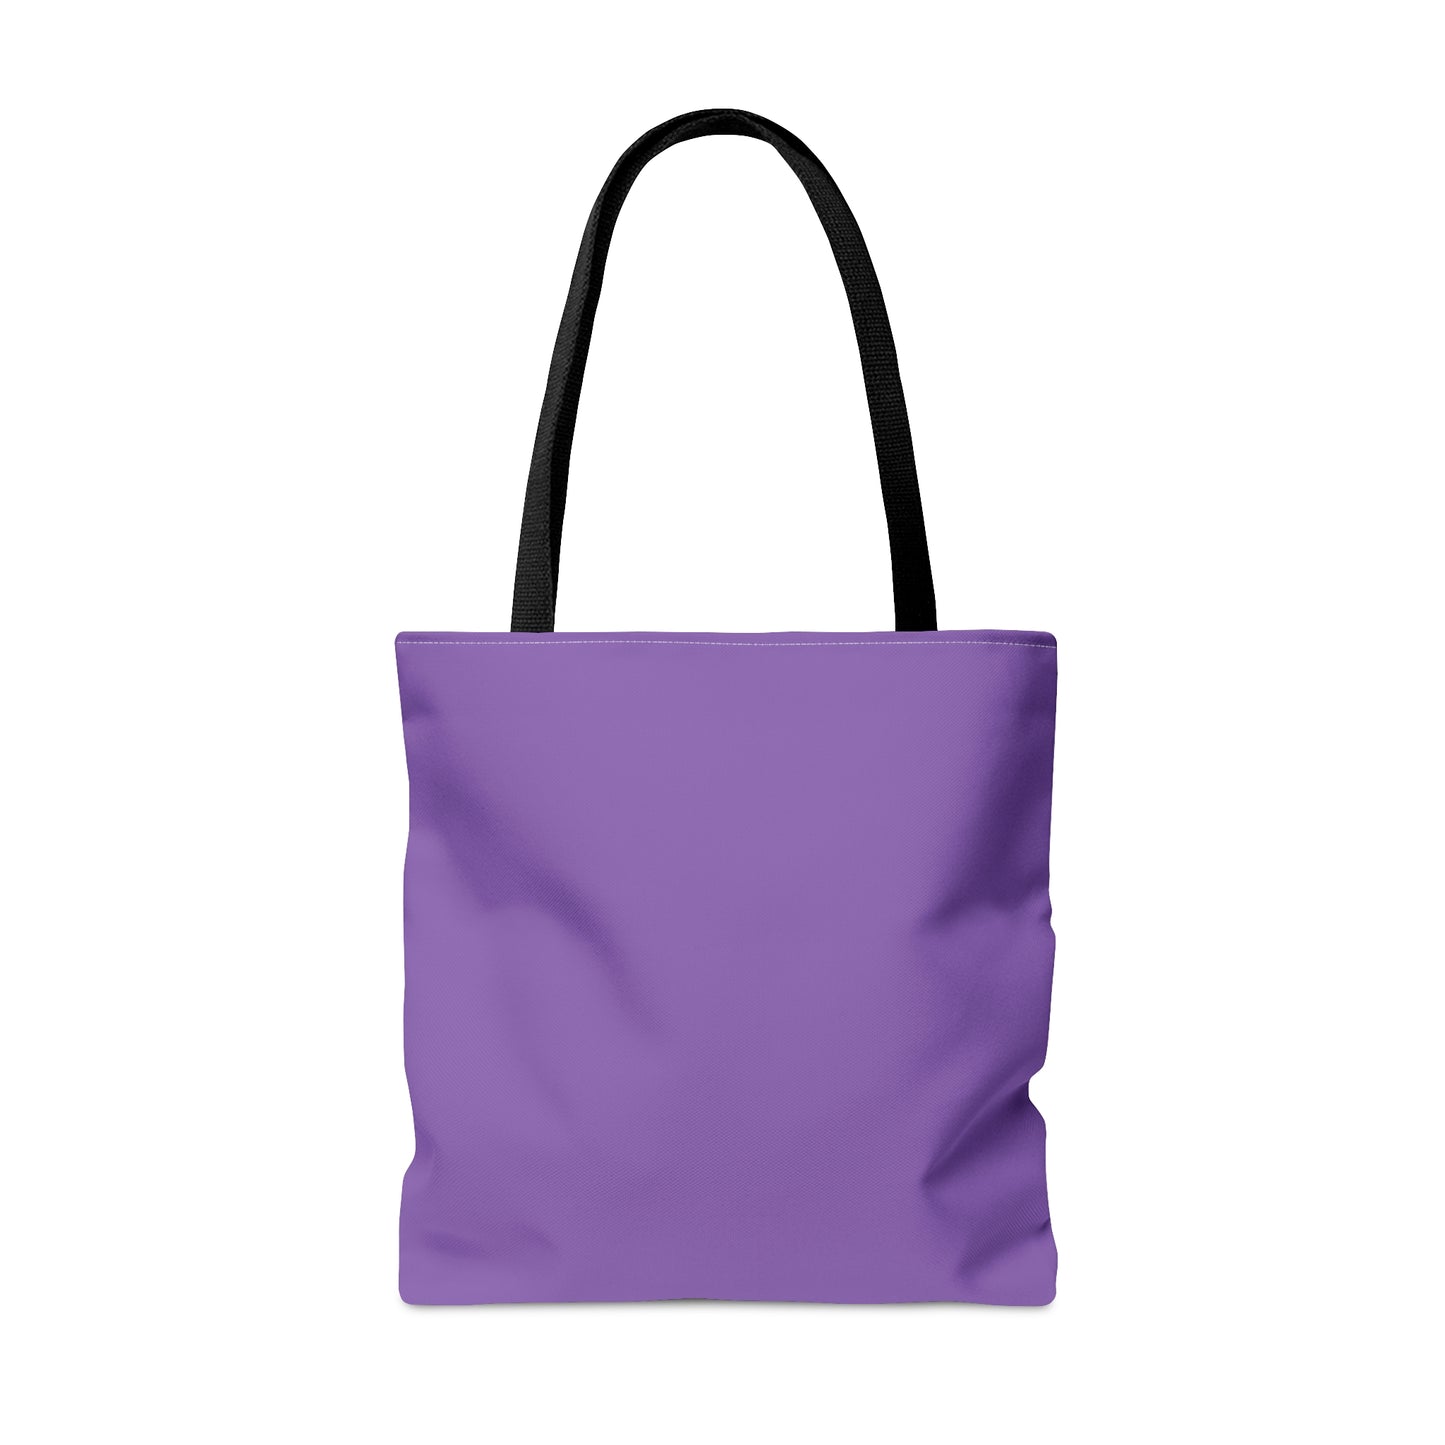 Outpost 31 Tote Bag (Color)